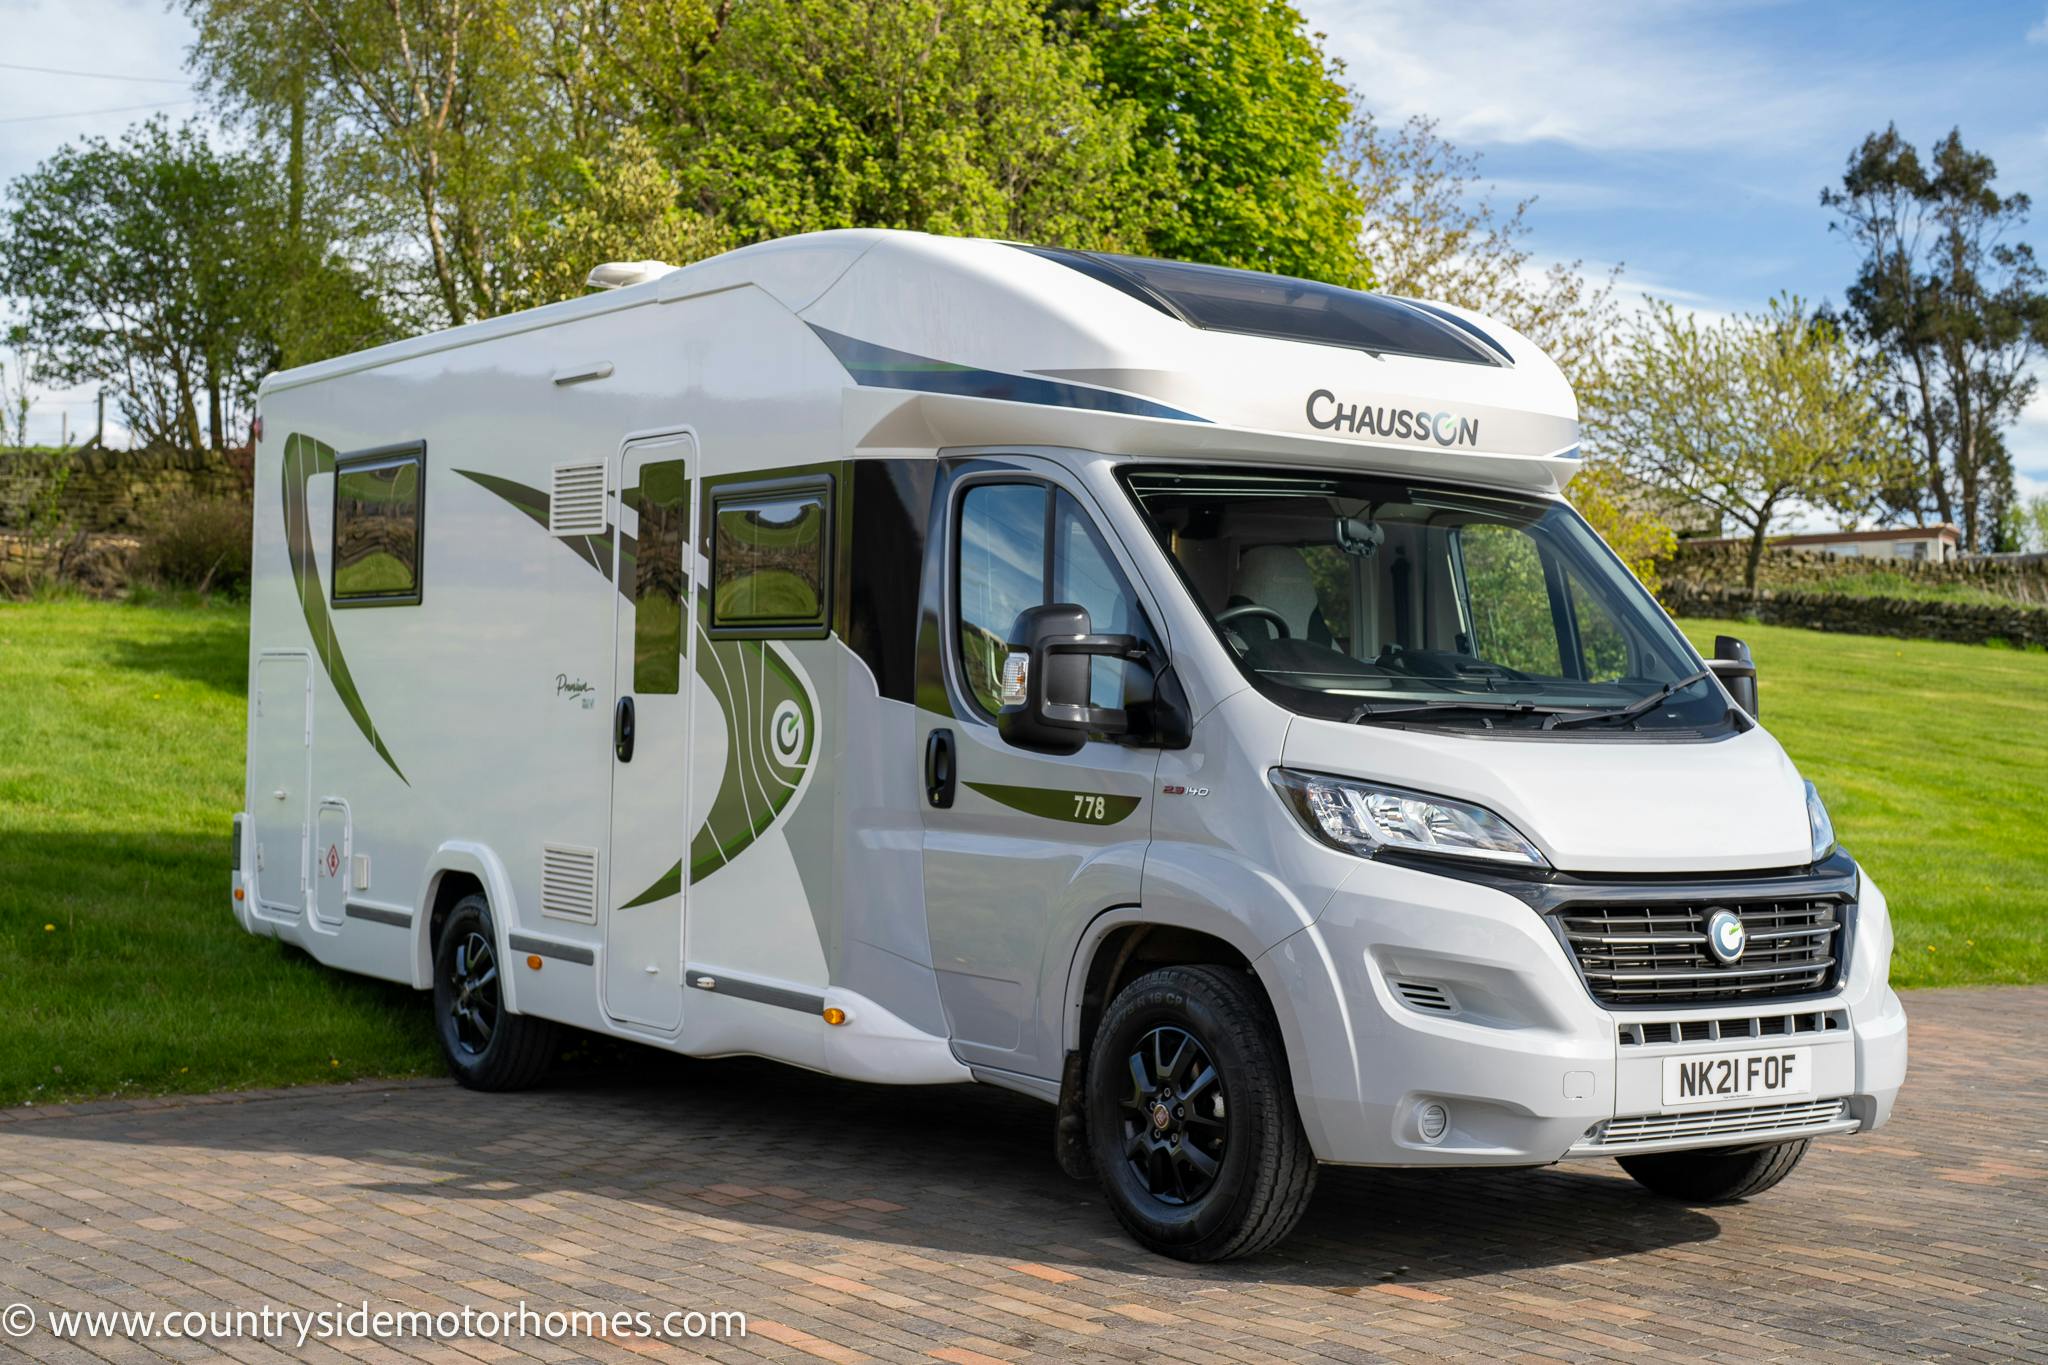 A white 2021 Chausson 778 Premium motorhome with green accents parked on a paved driveway. The model number "778" is displayed on the side, and the license plate reads "NX21 FDF." Trees and a grassy area are visible in the background. The website "www.countrysidemotorhomes.com" is noted.